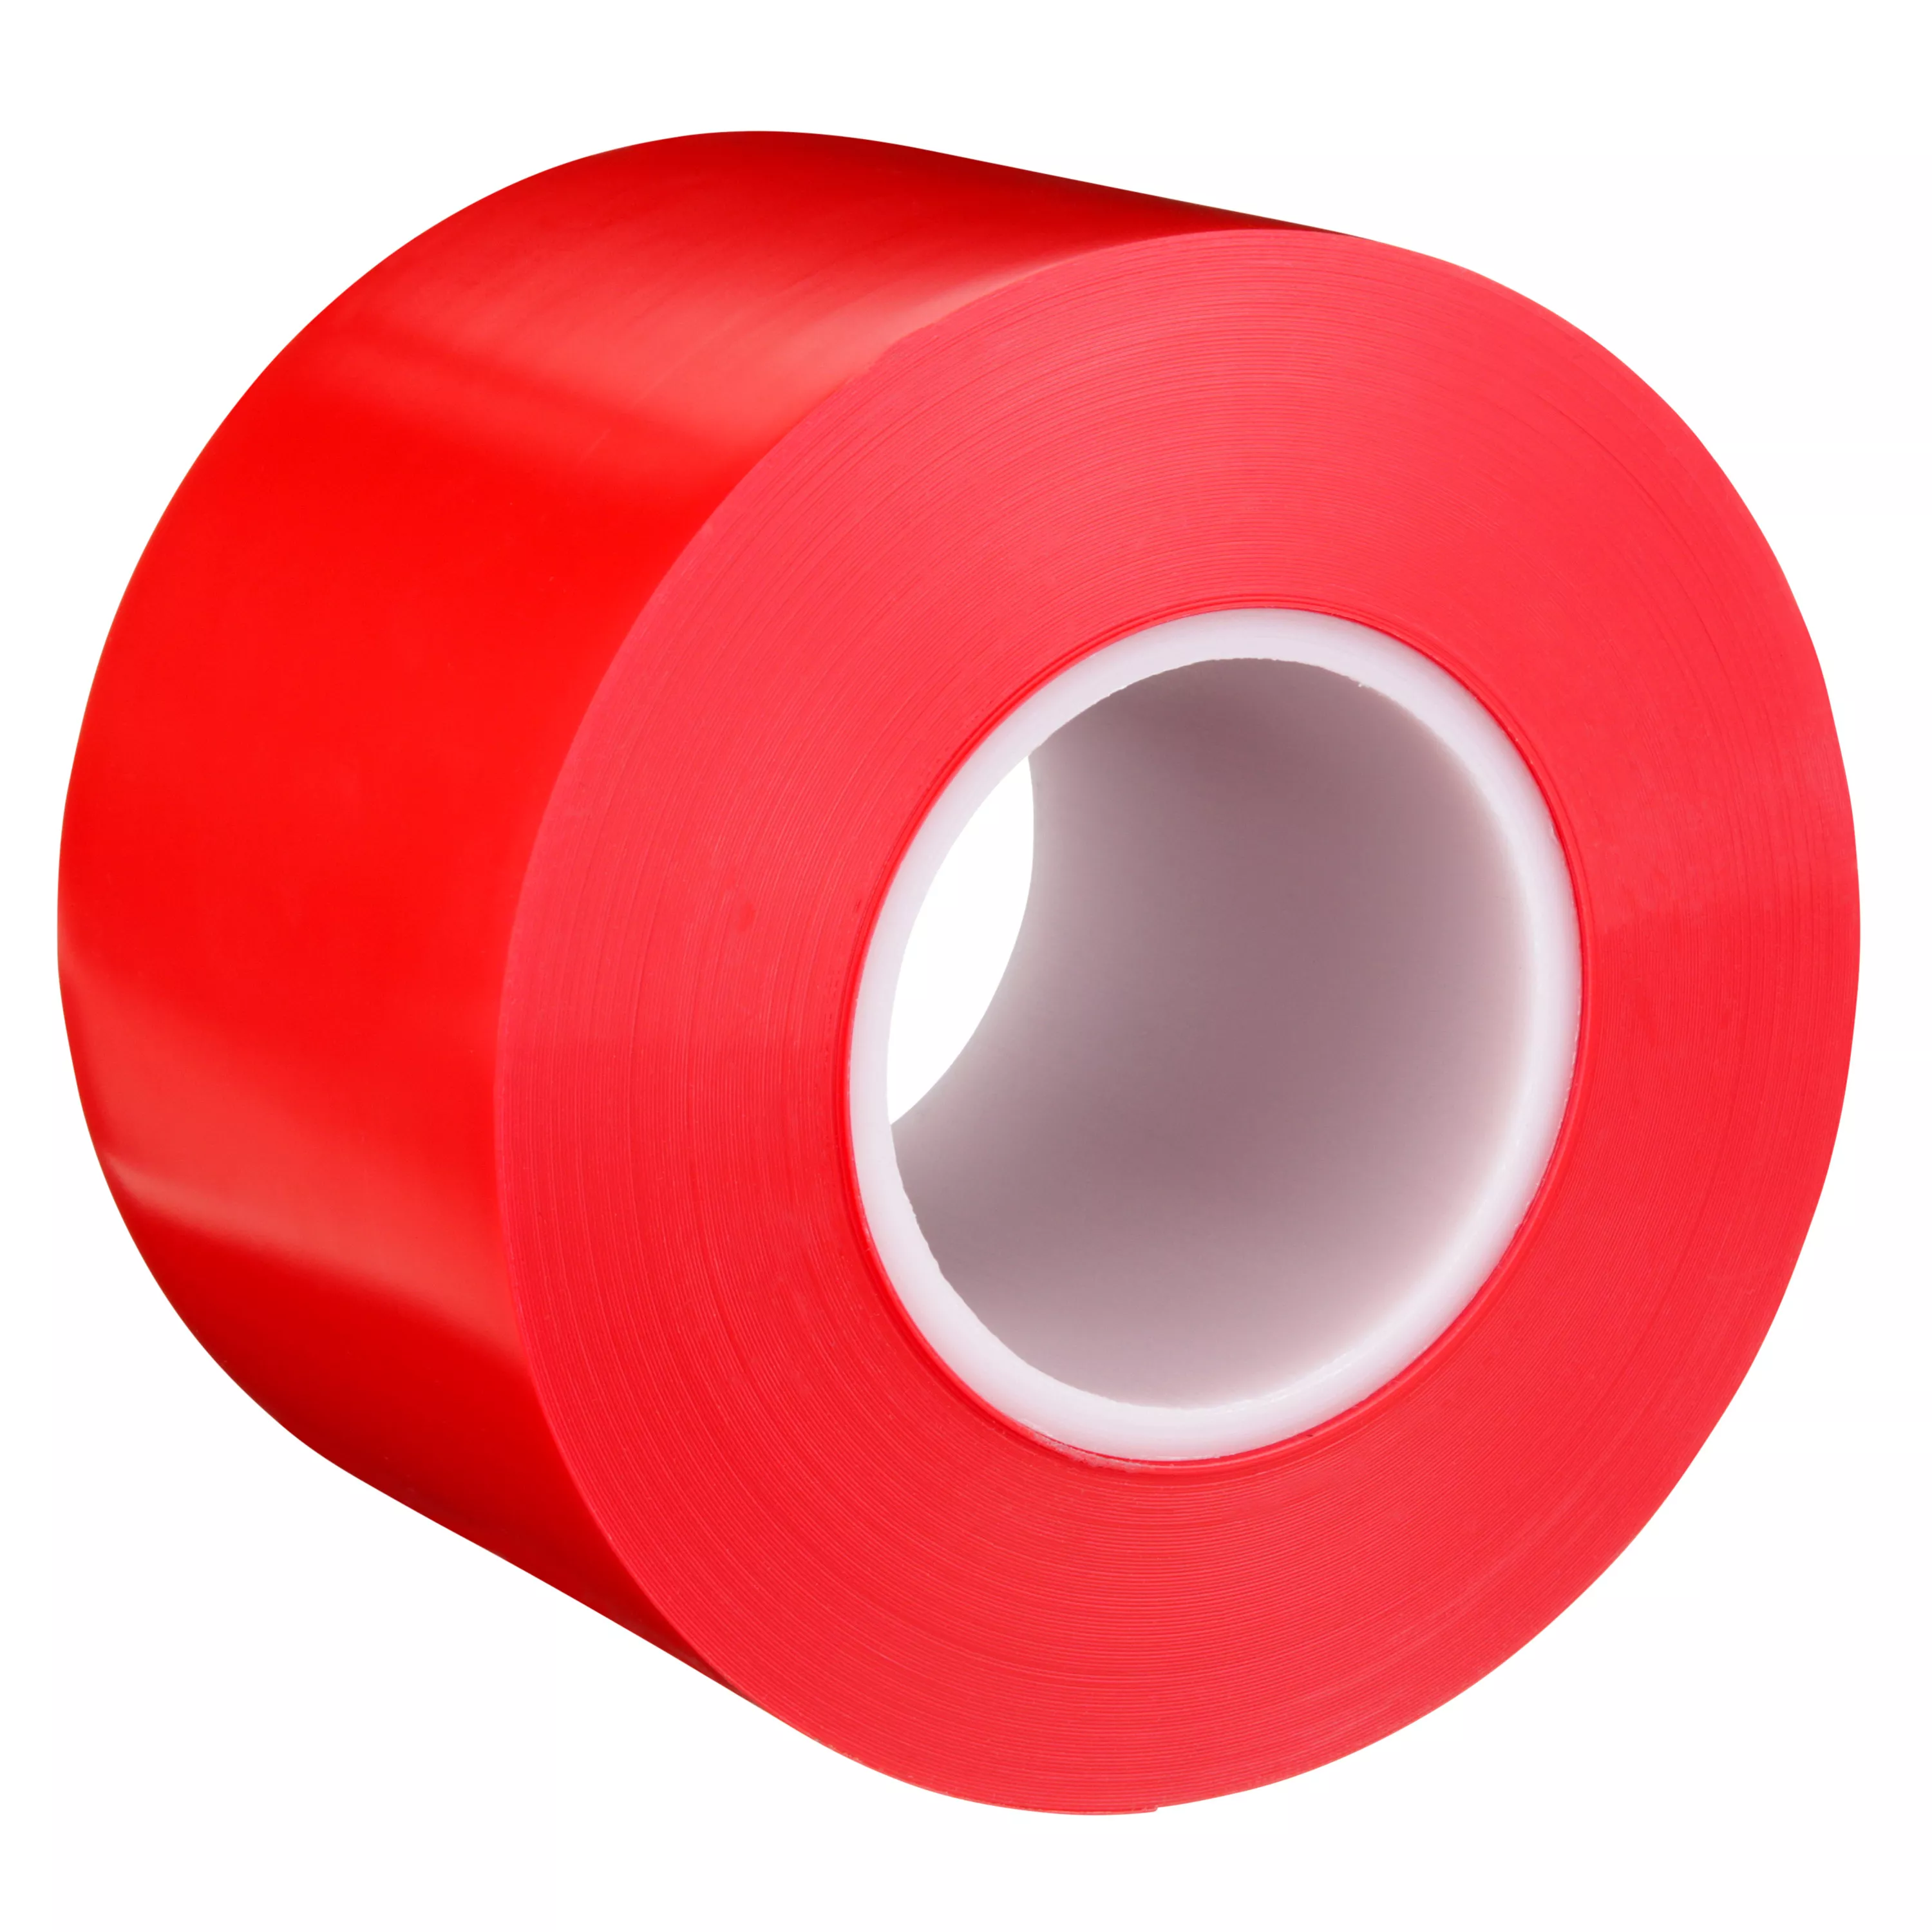 3M™ Durable Floor Marking Tape 971, Red, 4 in x 36 yd, 17 mil, 3 Rolls/Case, Individually Wrapped Conveniently Packaged